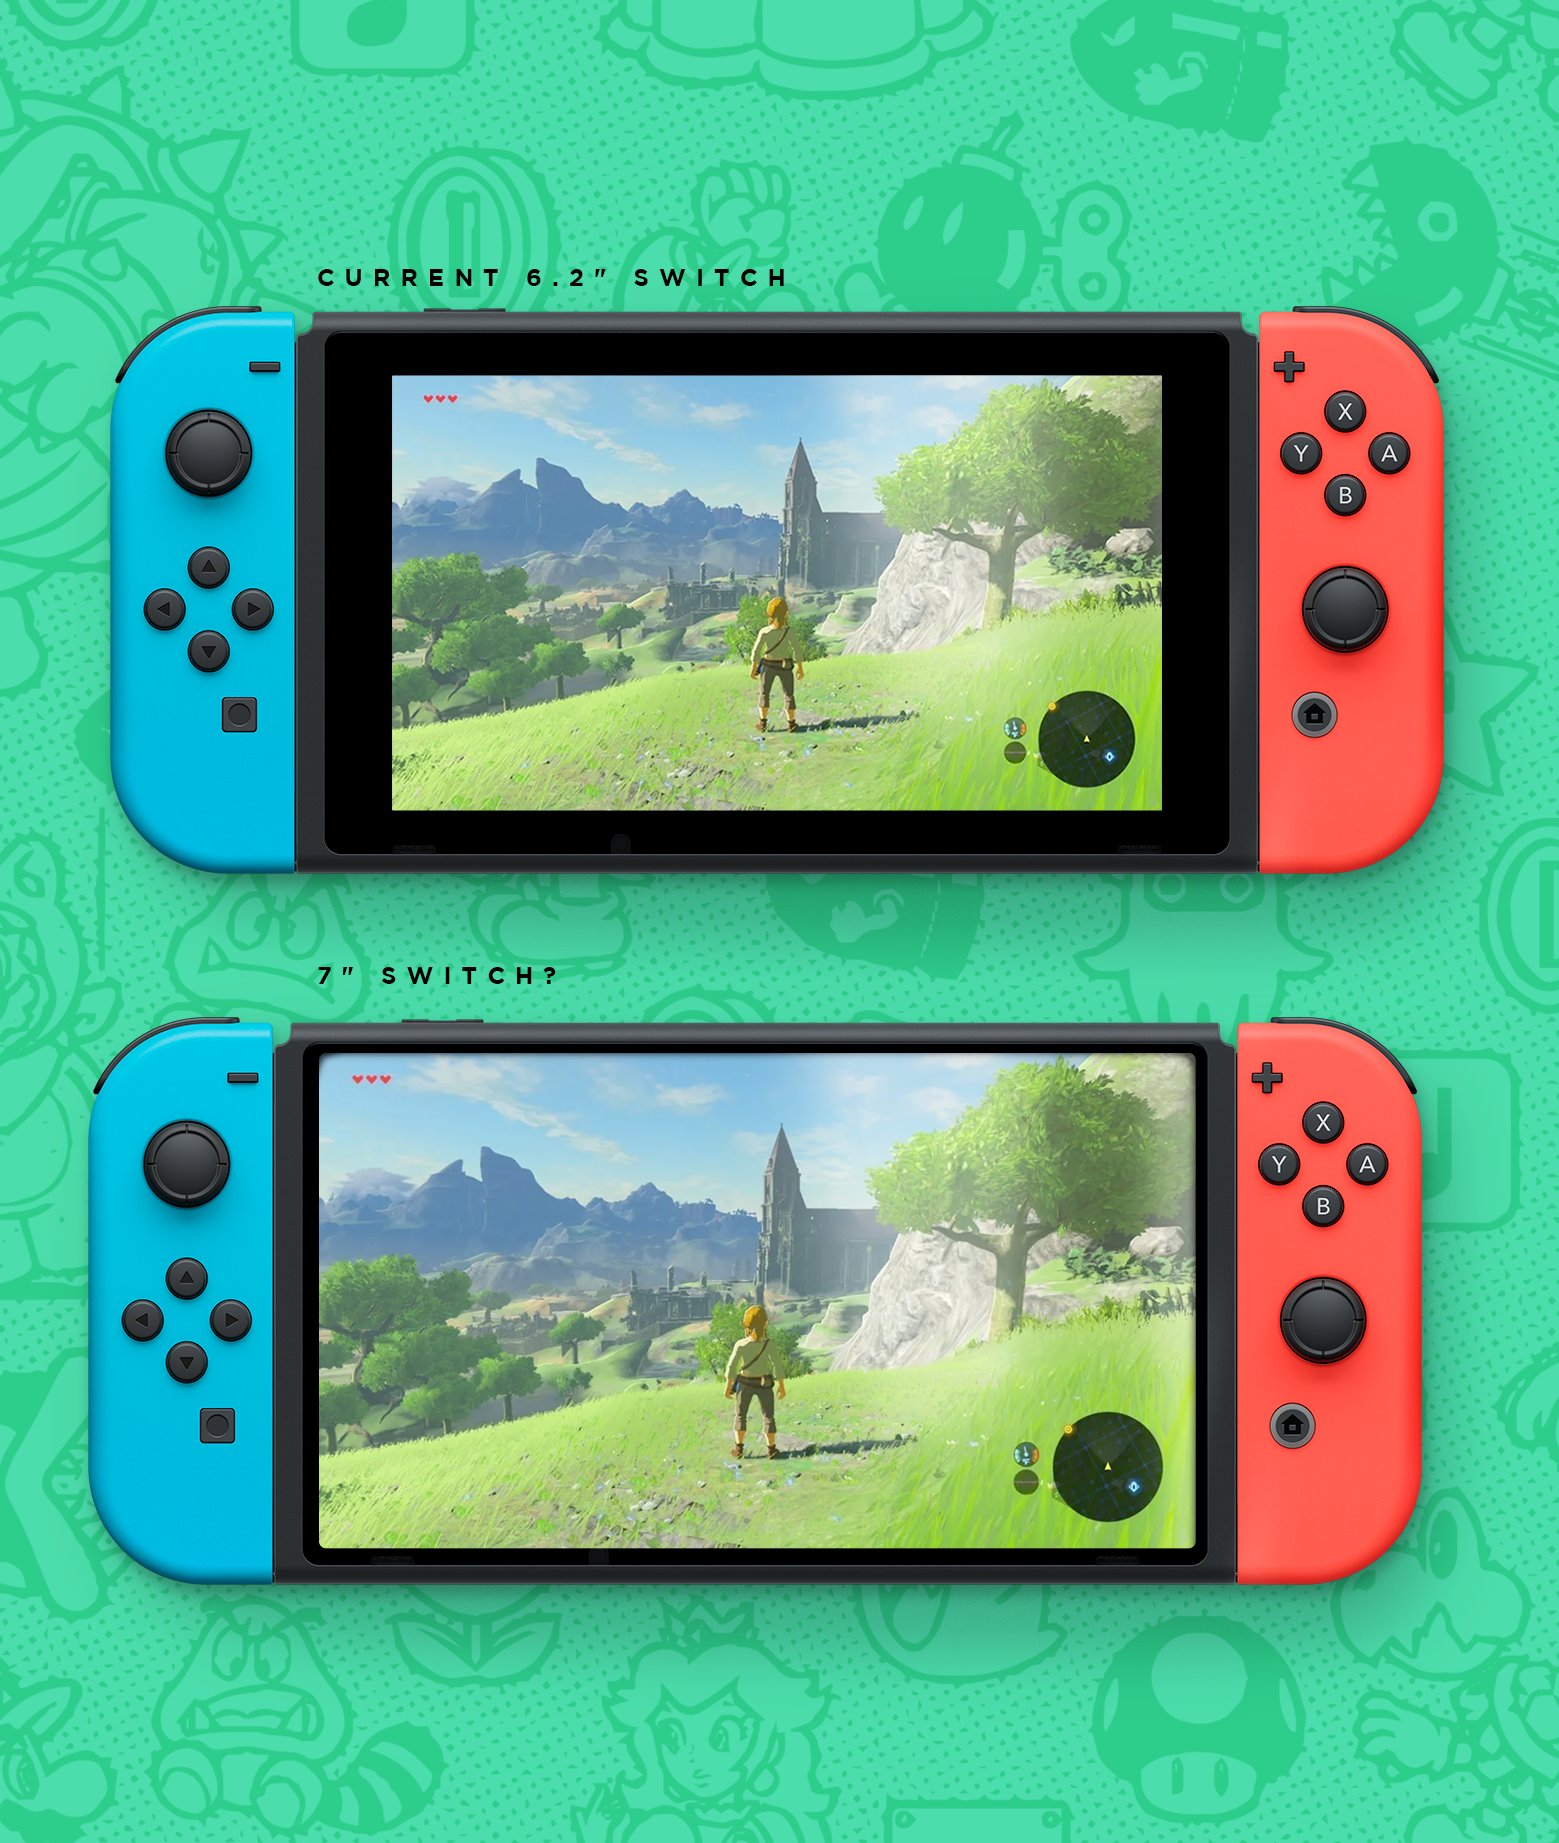 Zelda: Breath of the Wild 2 OLED mockup will probably become a reality